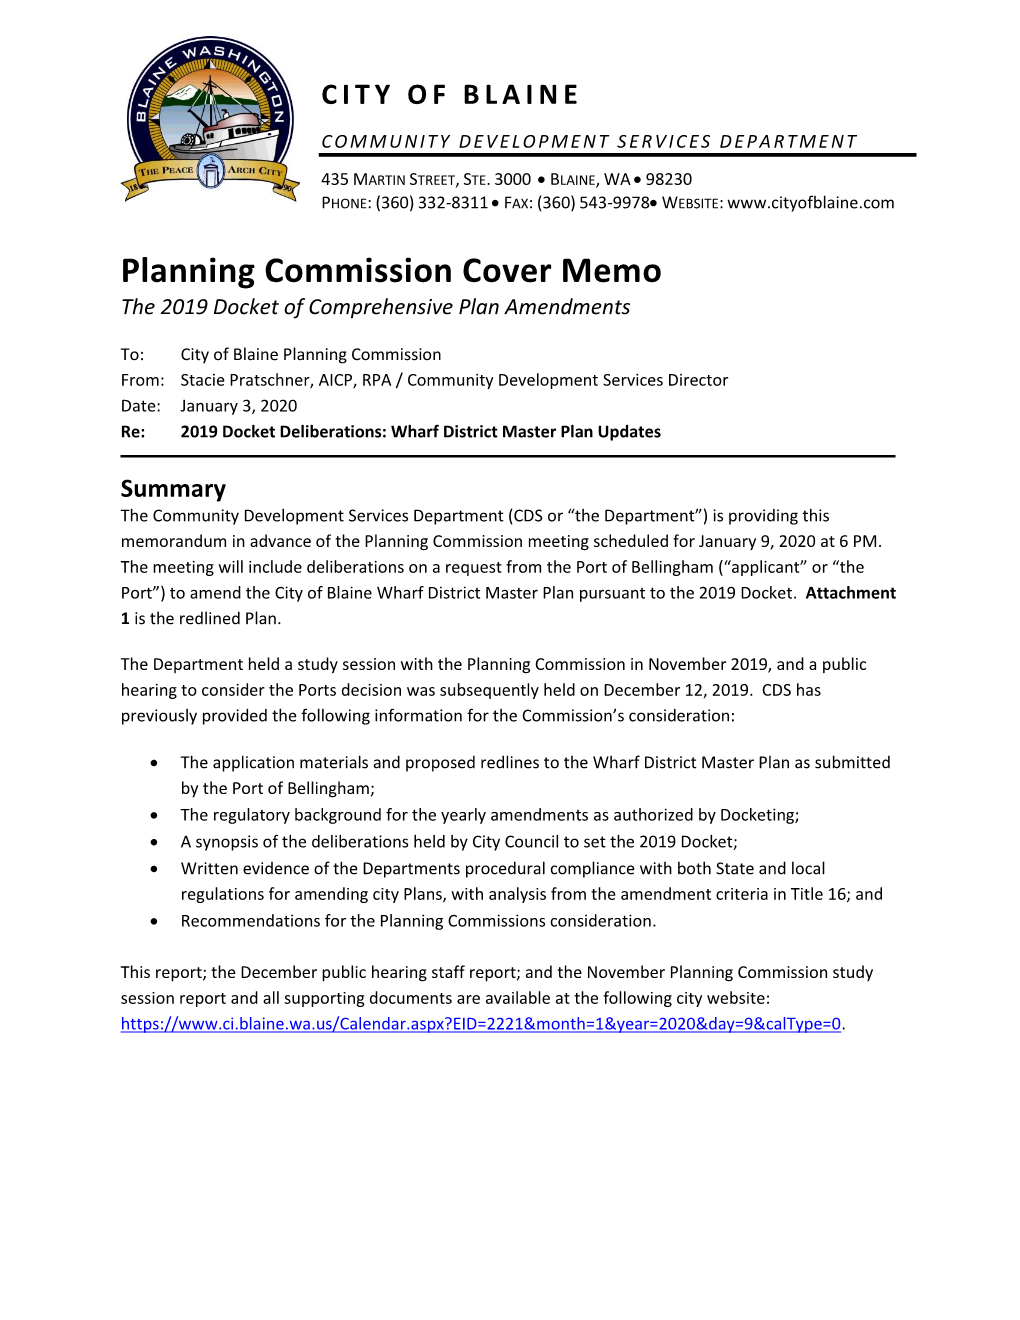 Planning Commission Cover Memo the 2019 Docket of Comprehensive Plan Amendments